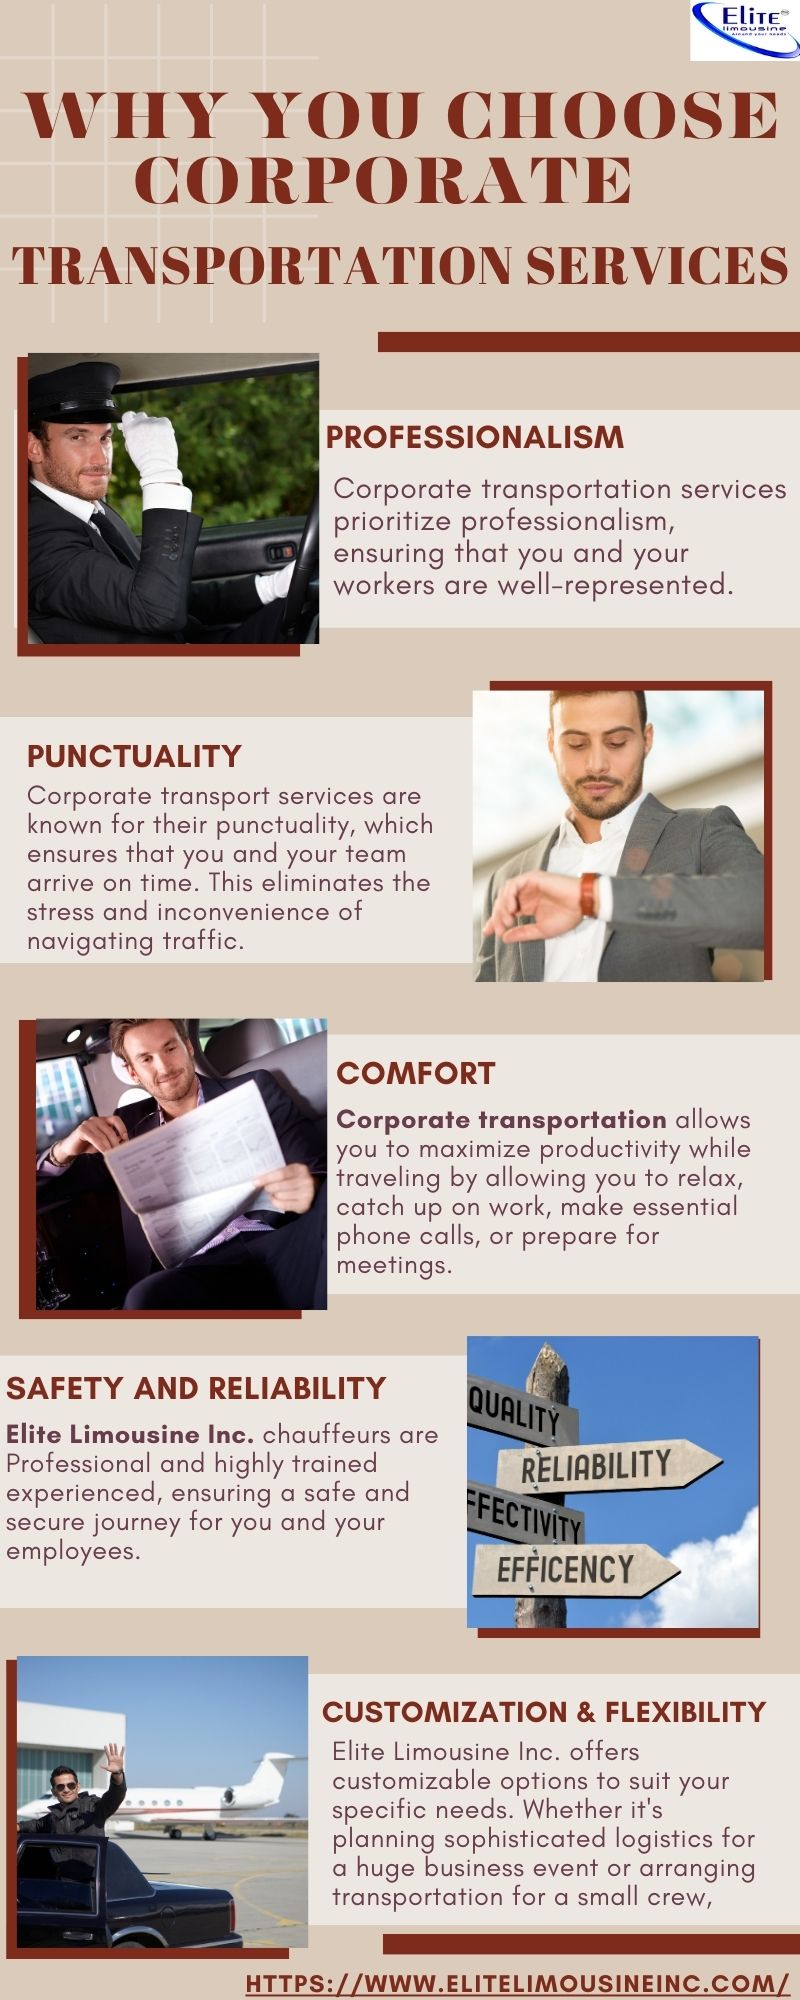 Why You Choose Corporate Transportation Services?